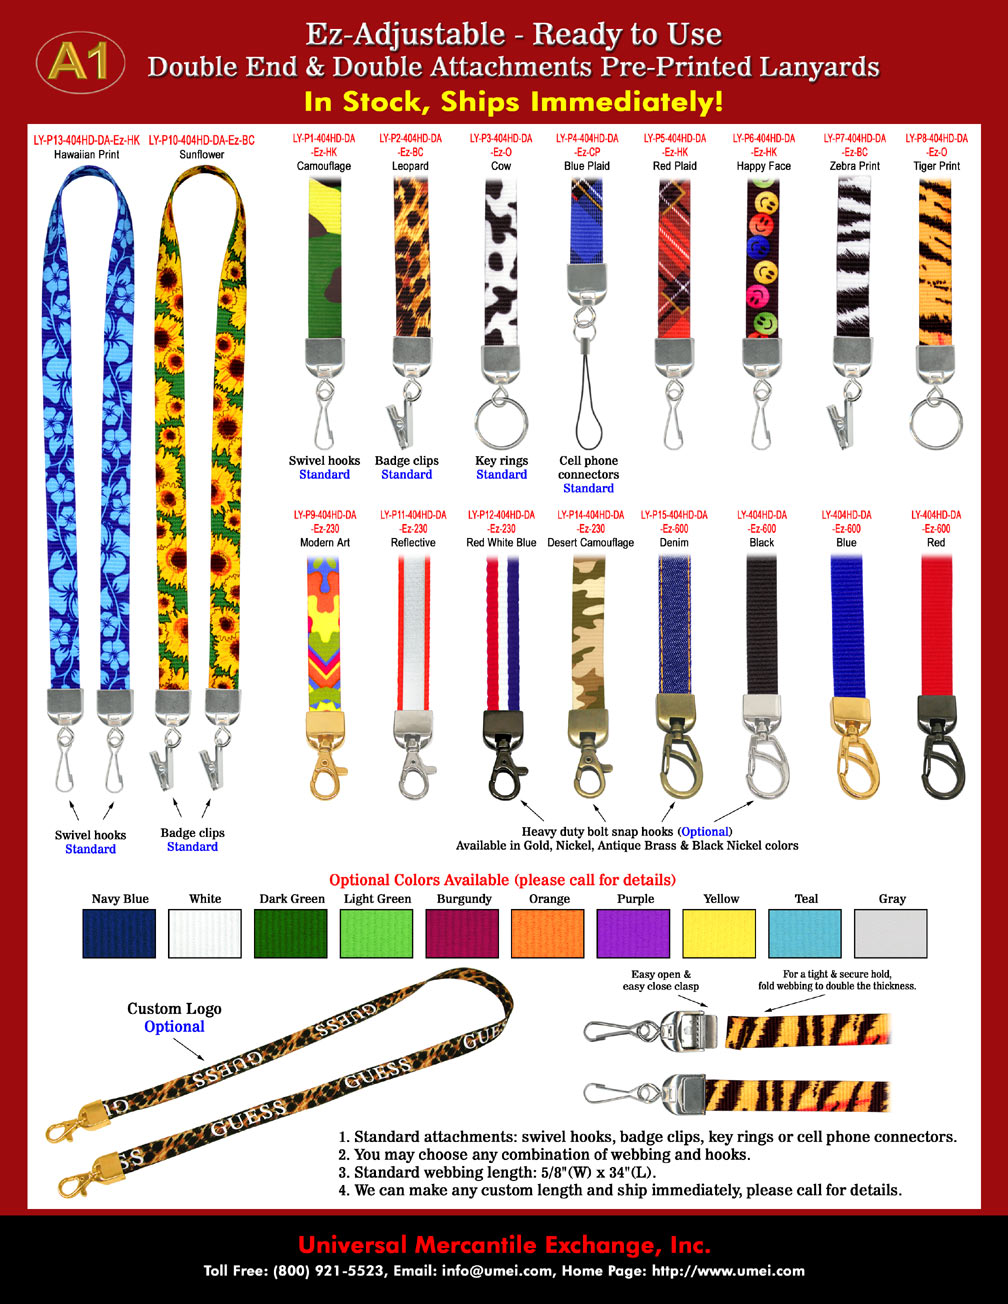 Imprinted Double Ends Lanyards With Easy Adjustable Length